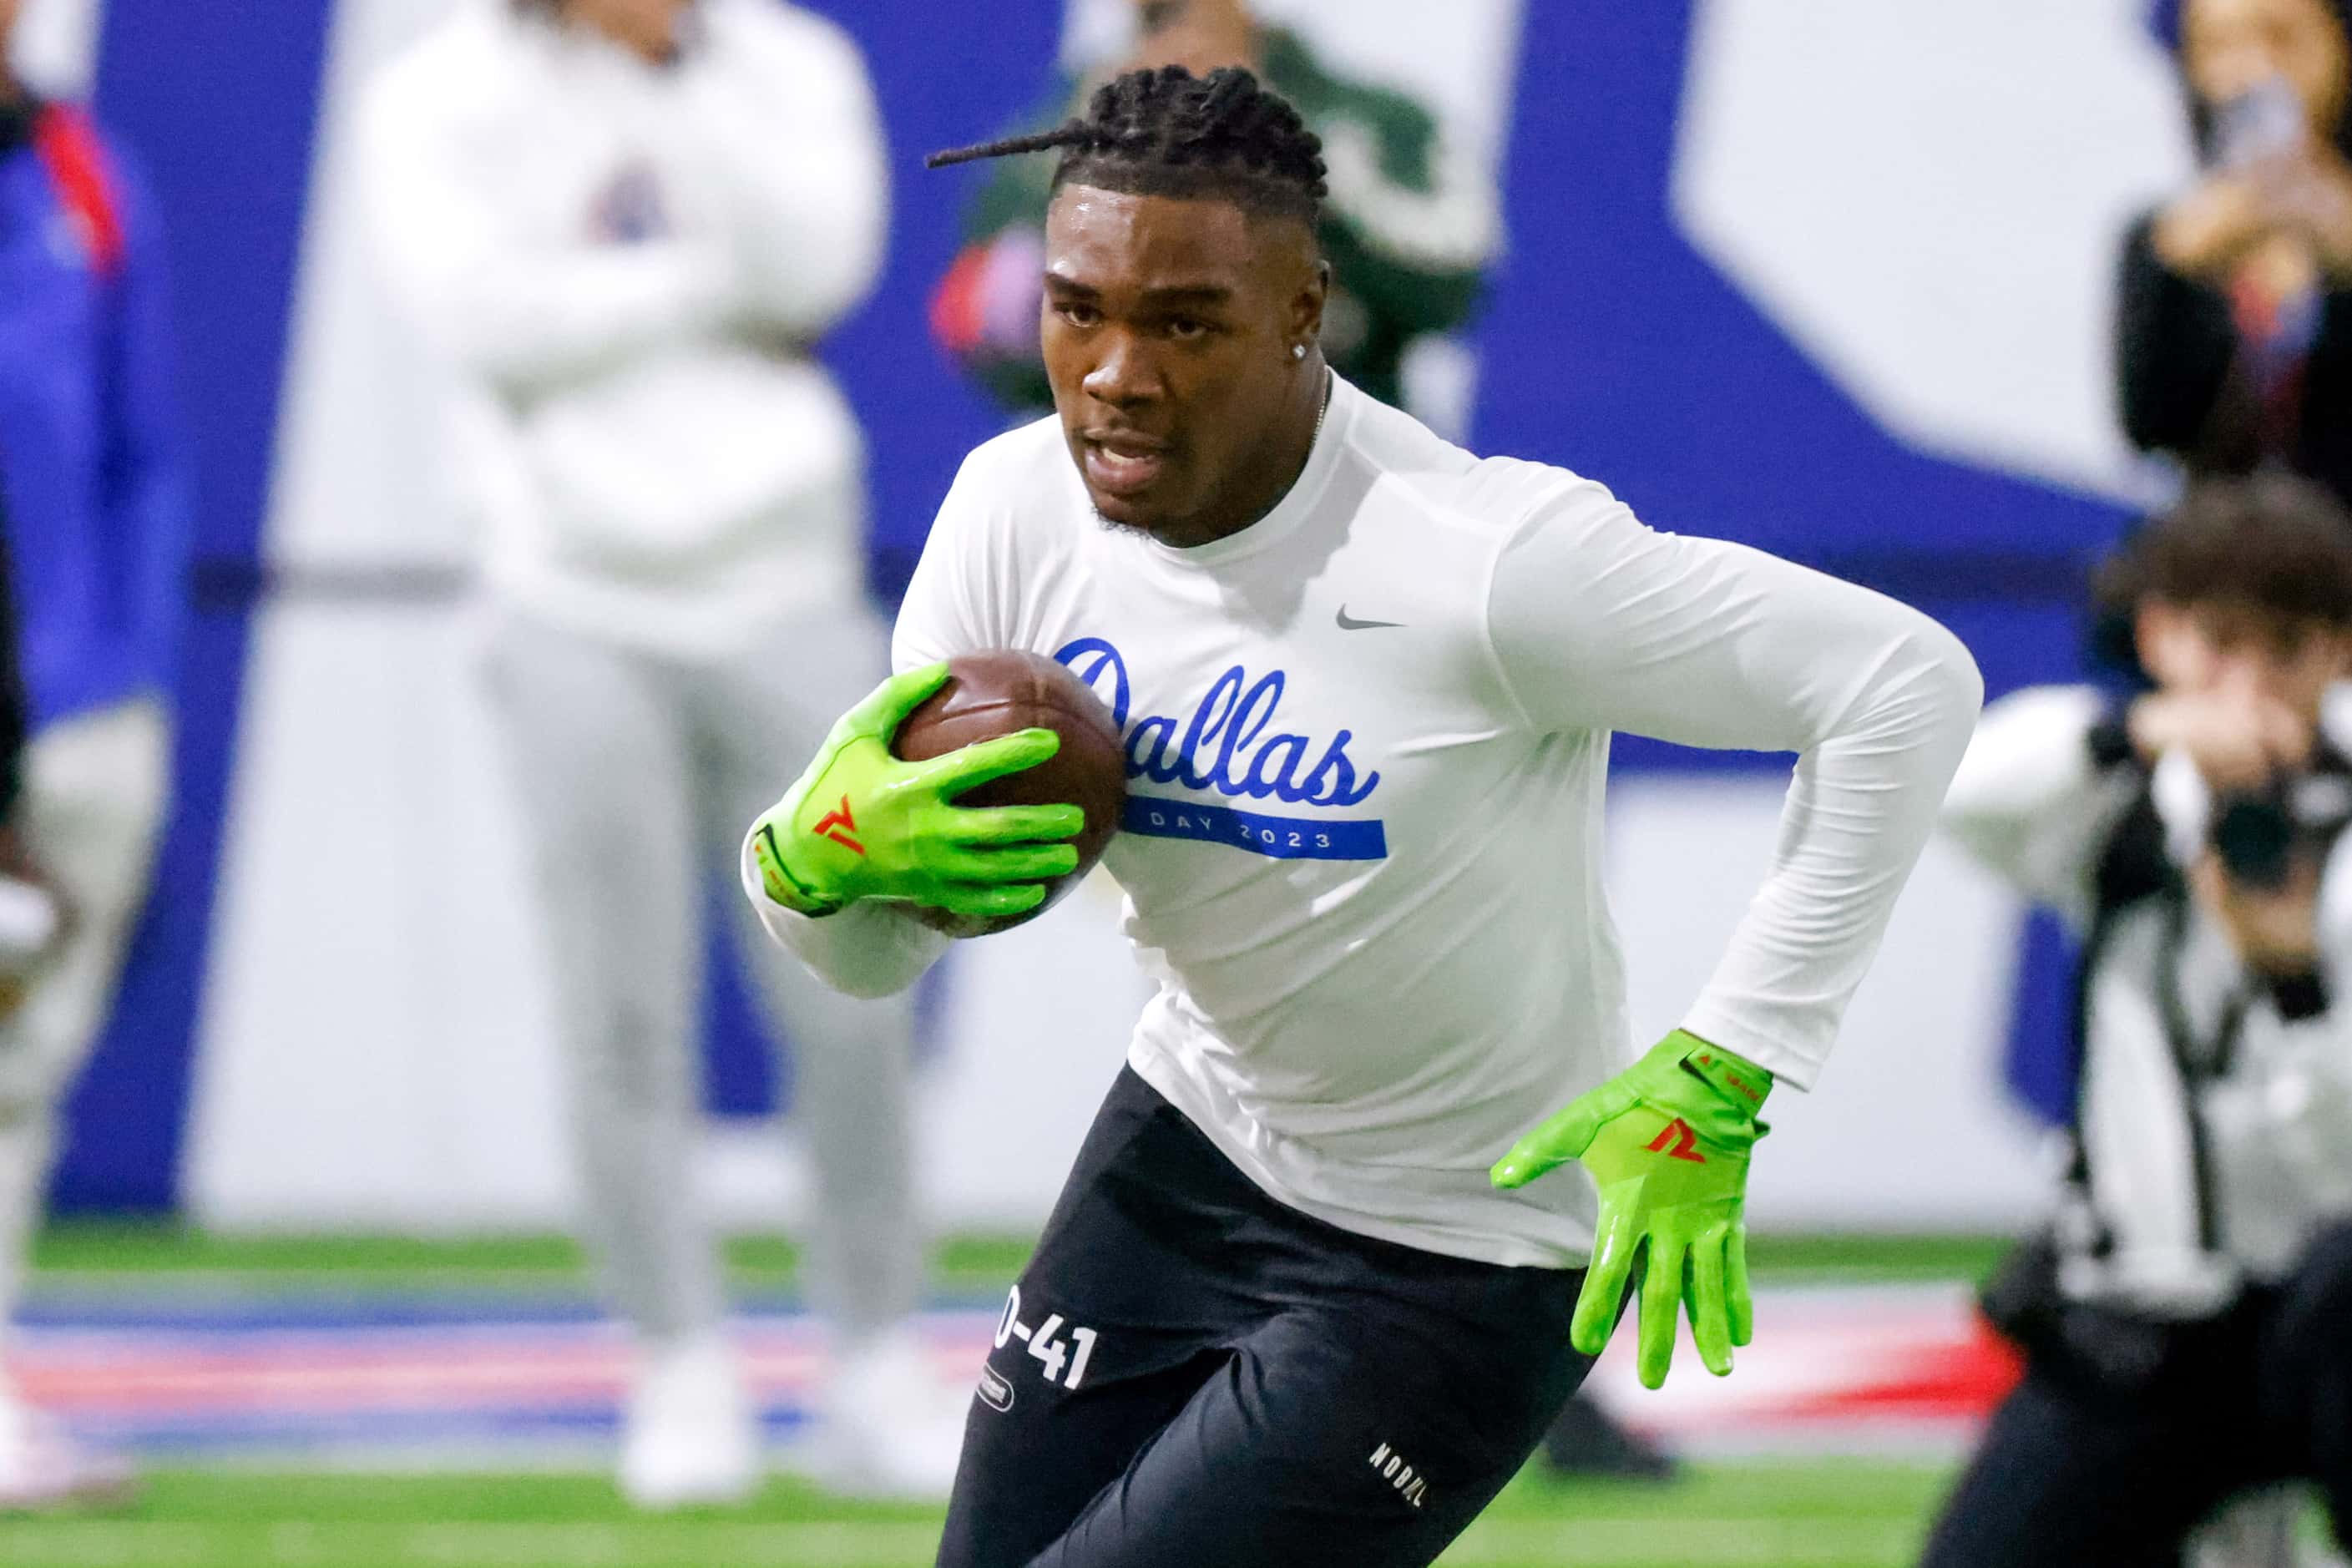 Rashee Rice during the SMU Football's 2023 NFL Pro Day in Dallas on Wednesday, March 22, 2023.